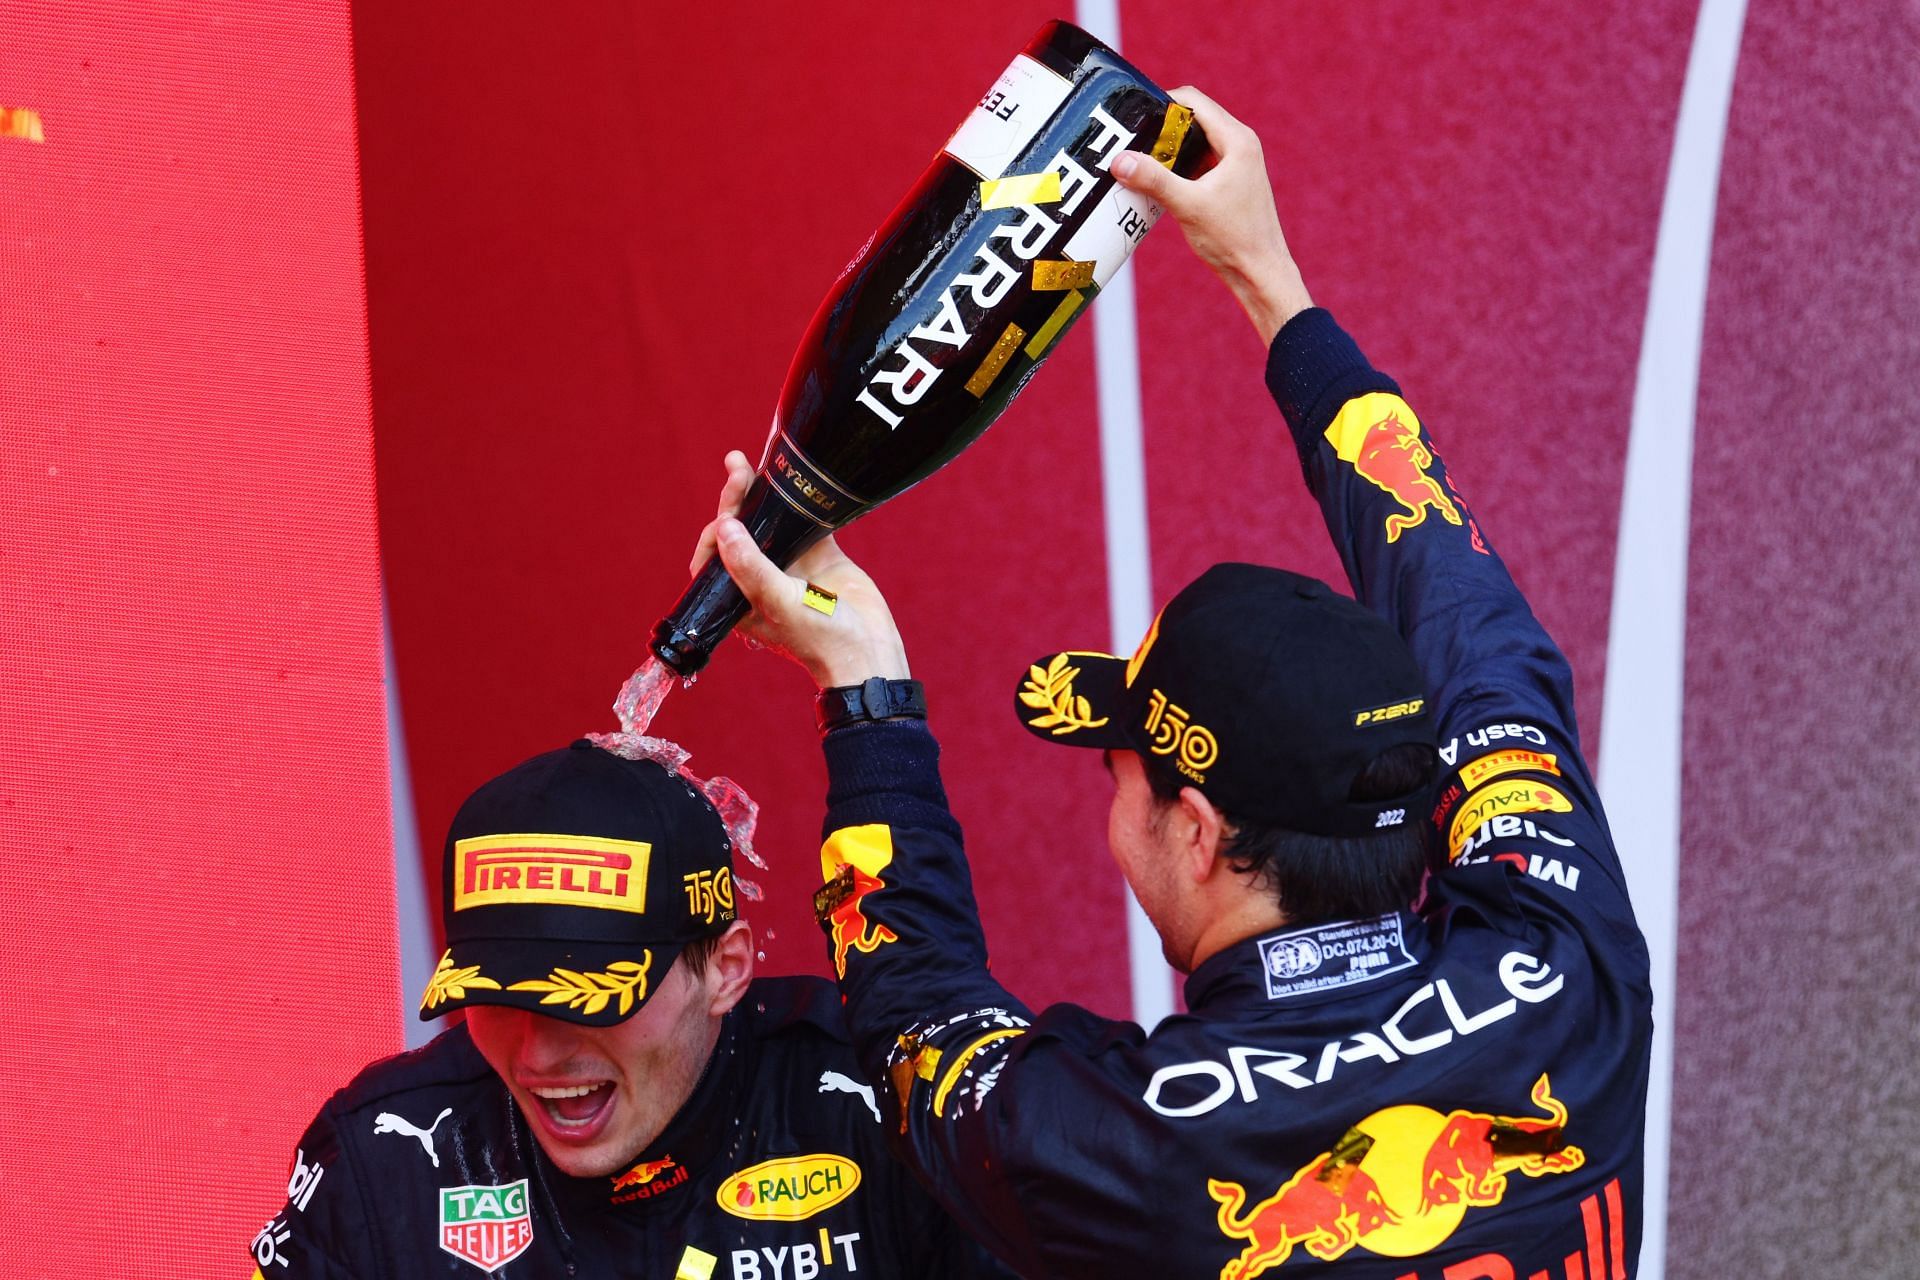 Max Verstappen (left) and Sergio Perez (right) celebrate on the podium during the 2022 F1 Grand Prix of Azerbaijan (Photo by Clive Rose/Getty Images)